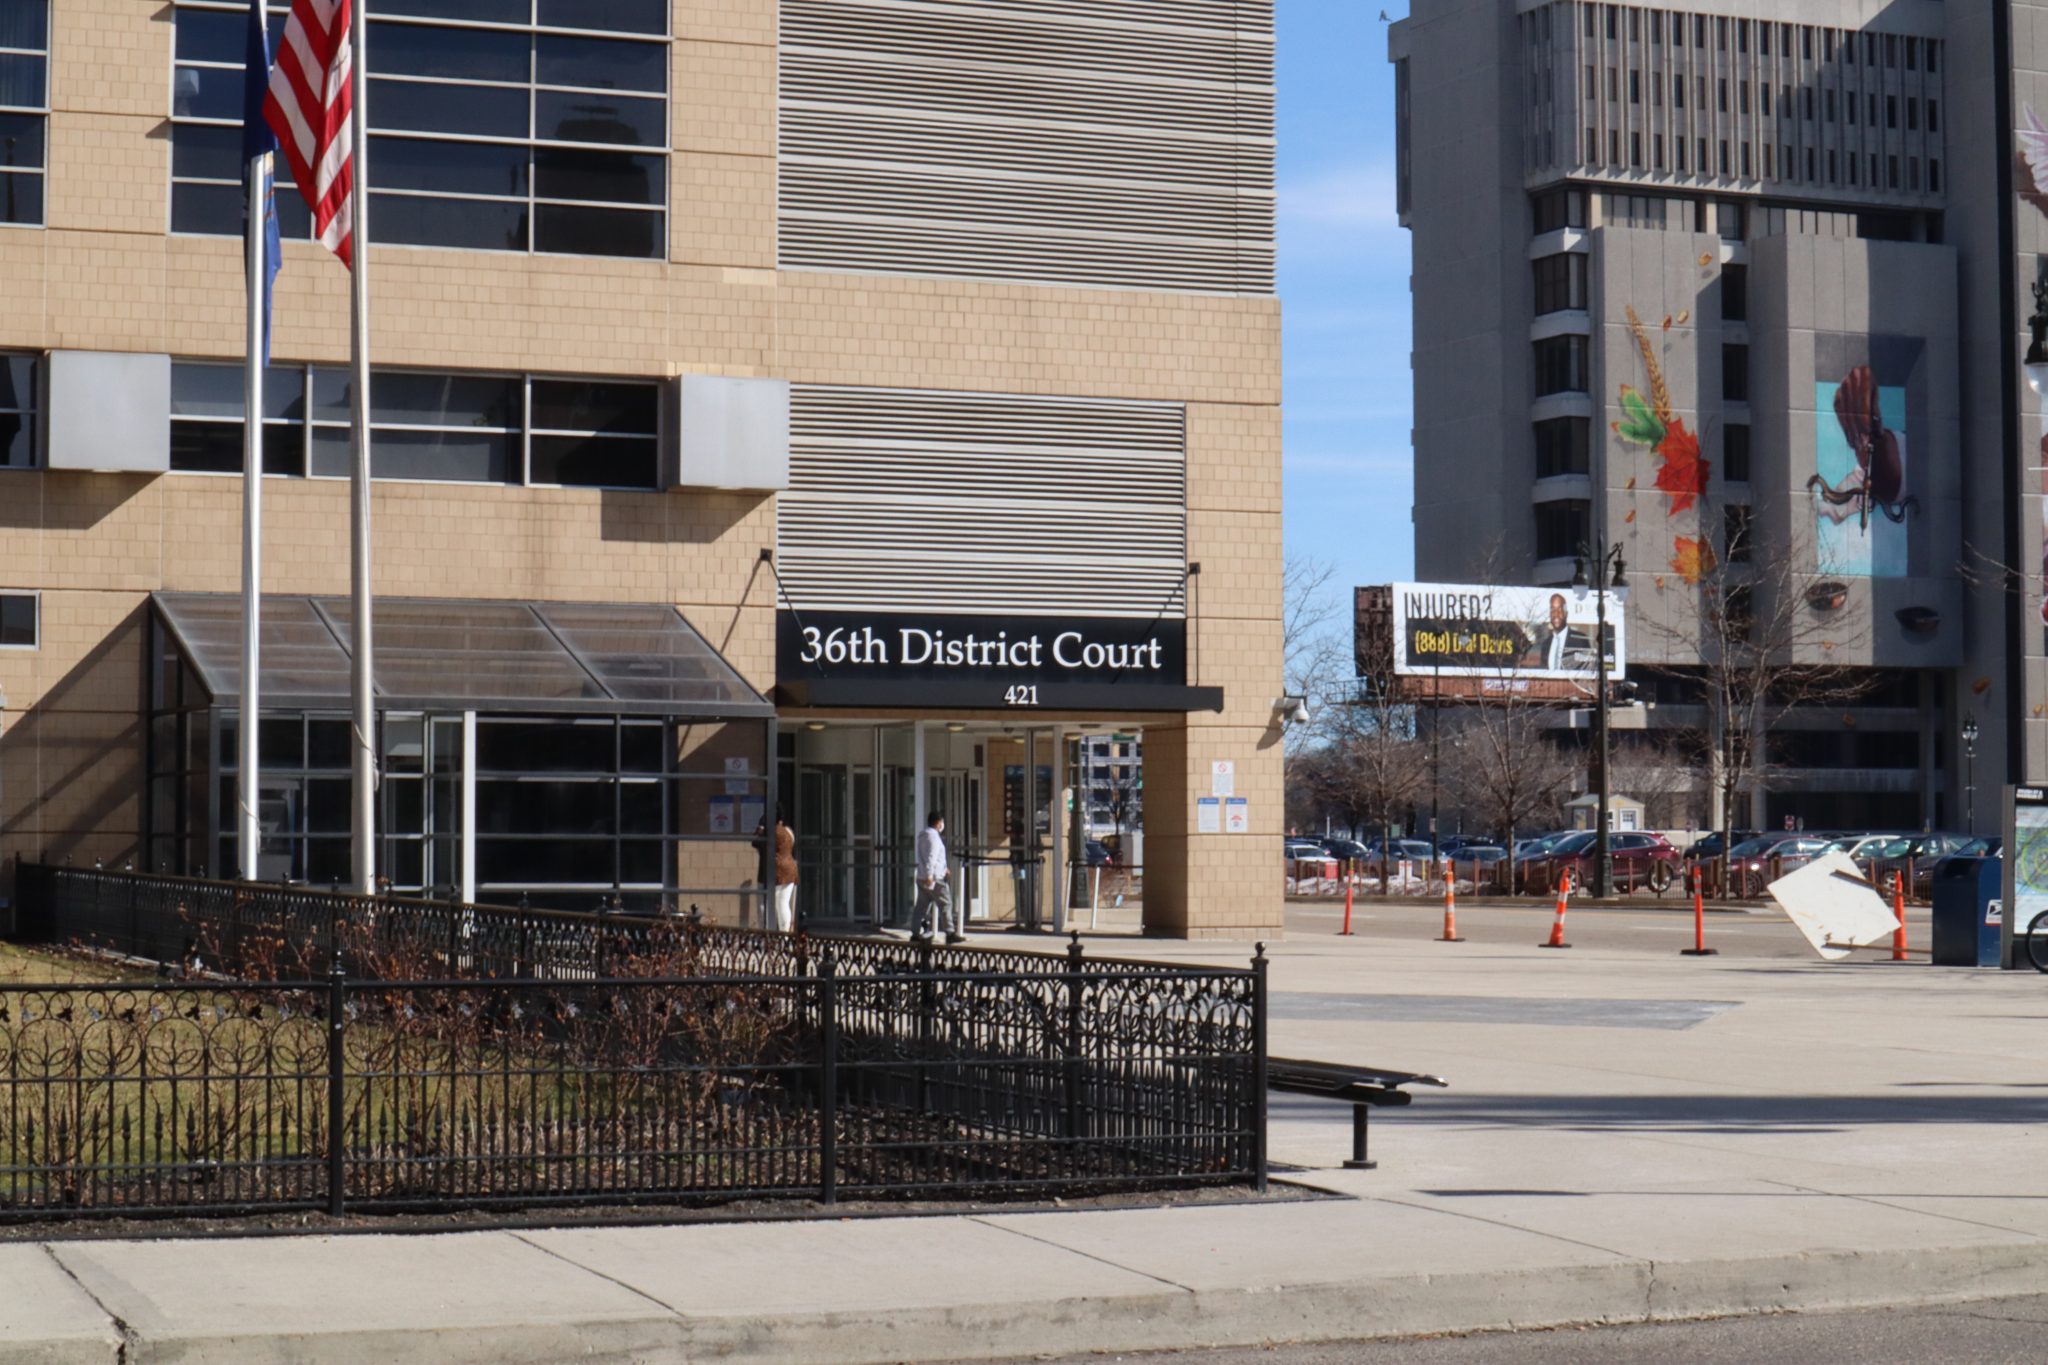 Photo of the 36th District Court in Detroit, Michigan.